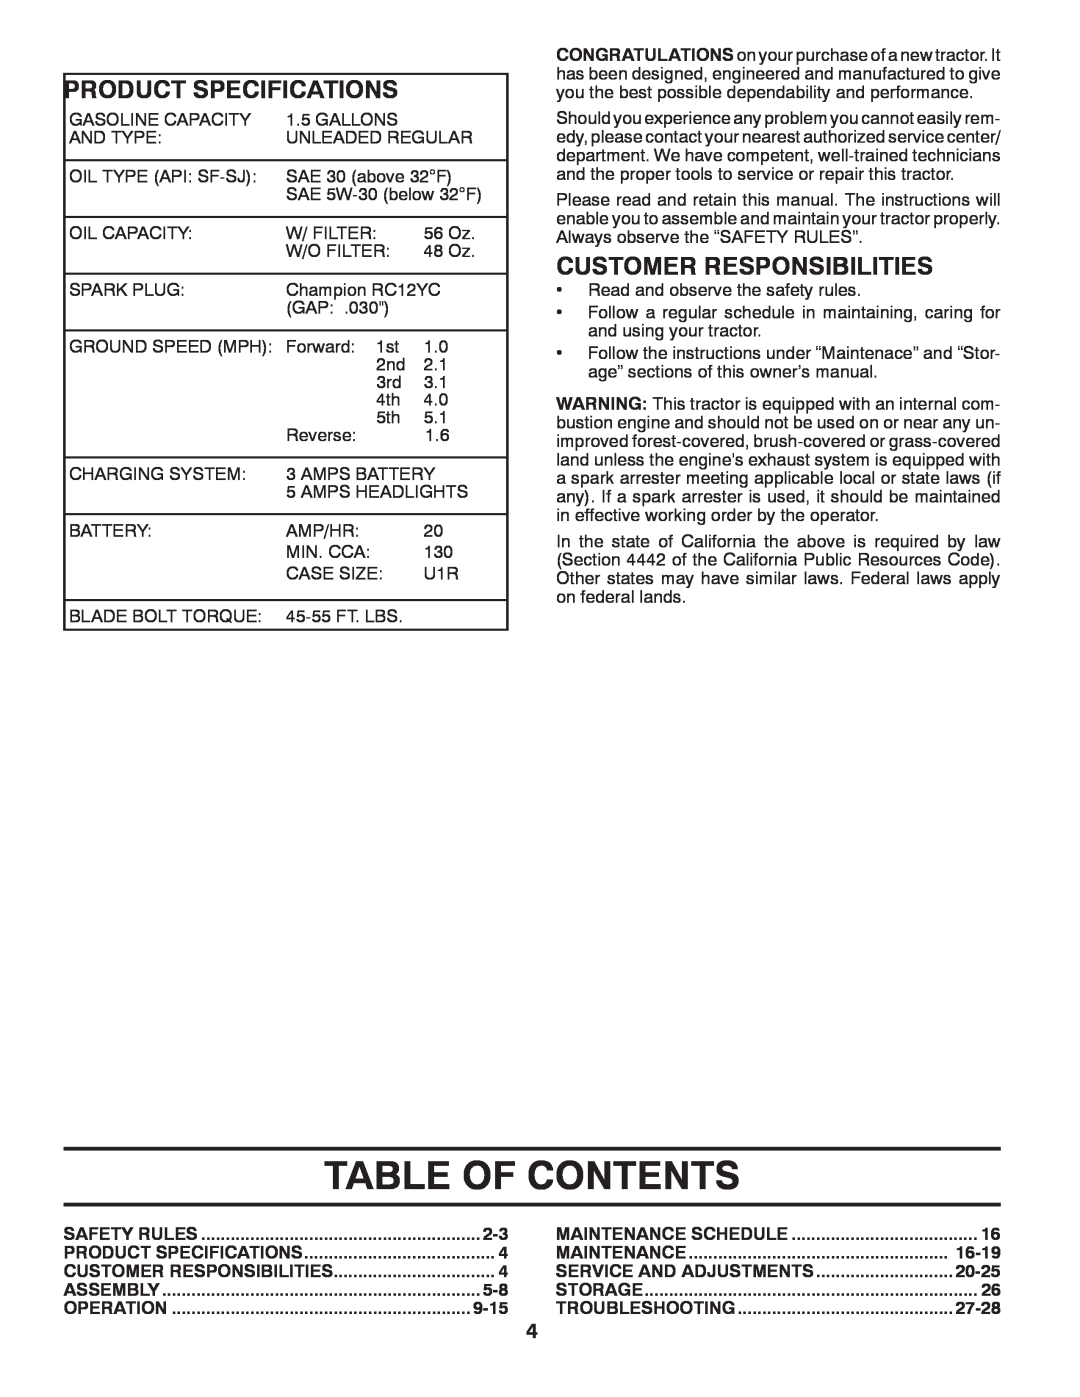 McCulloch 96041011501, 532 42 27-27 Rev. 2 manual Table Of Contents, Product Specifications, Customer Responsibilities 